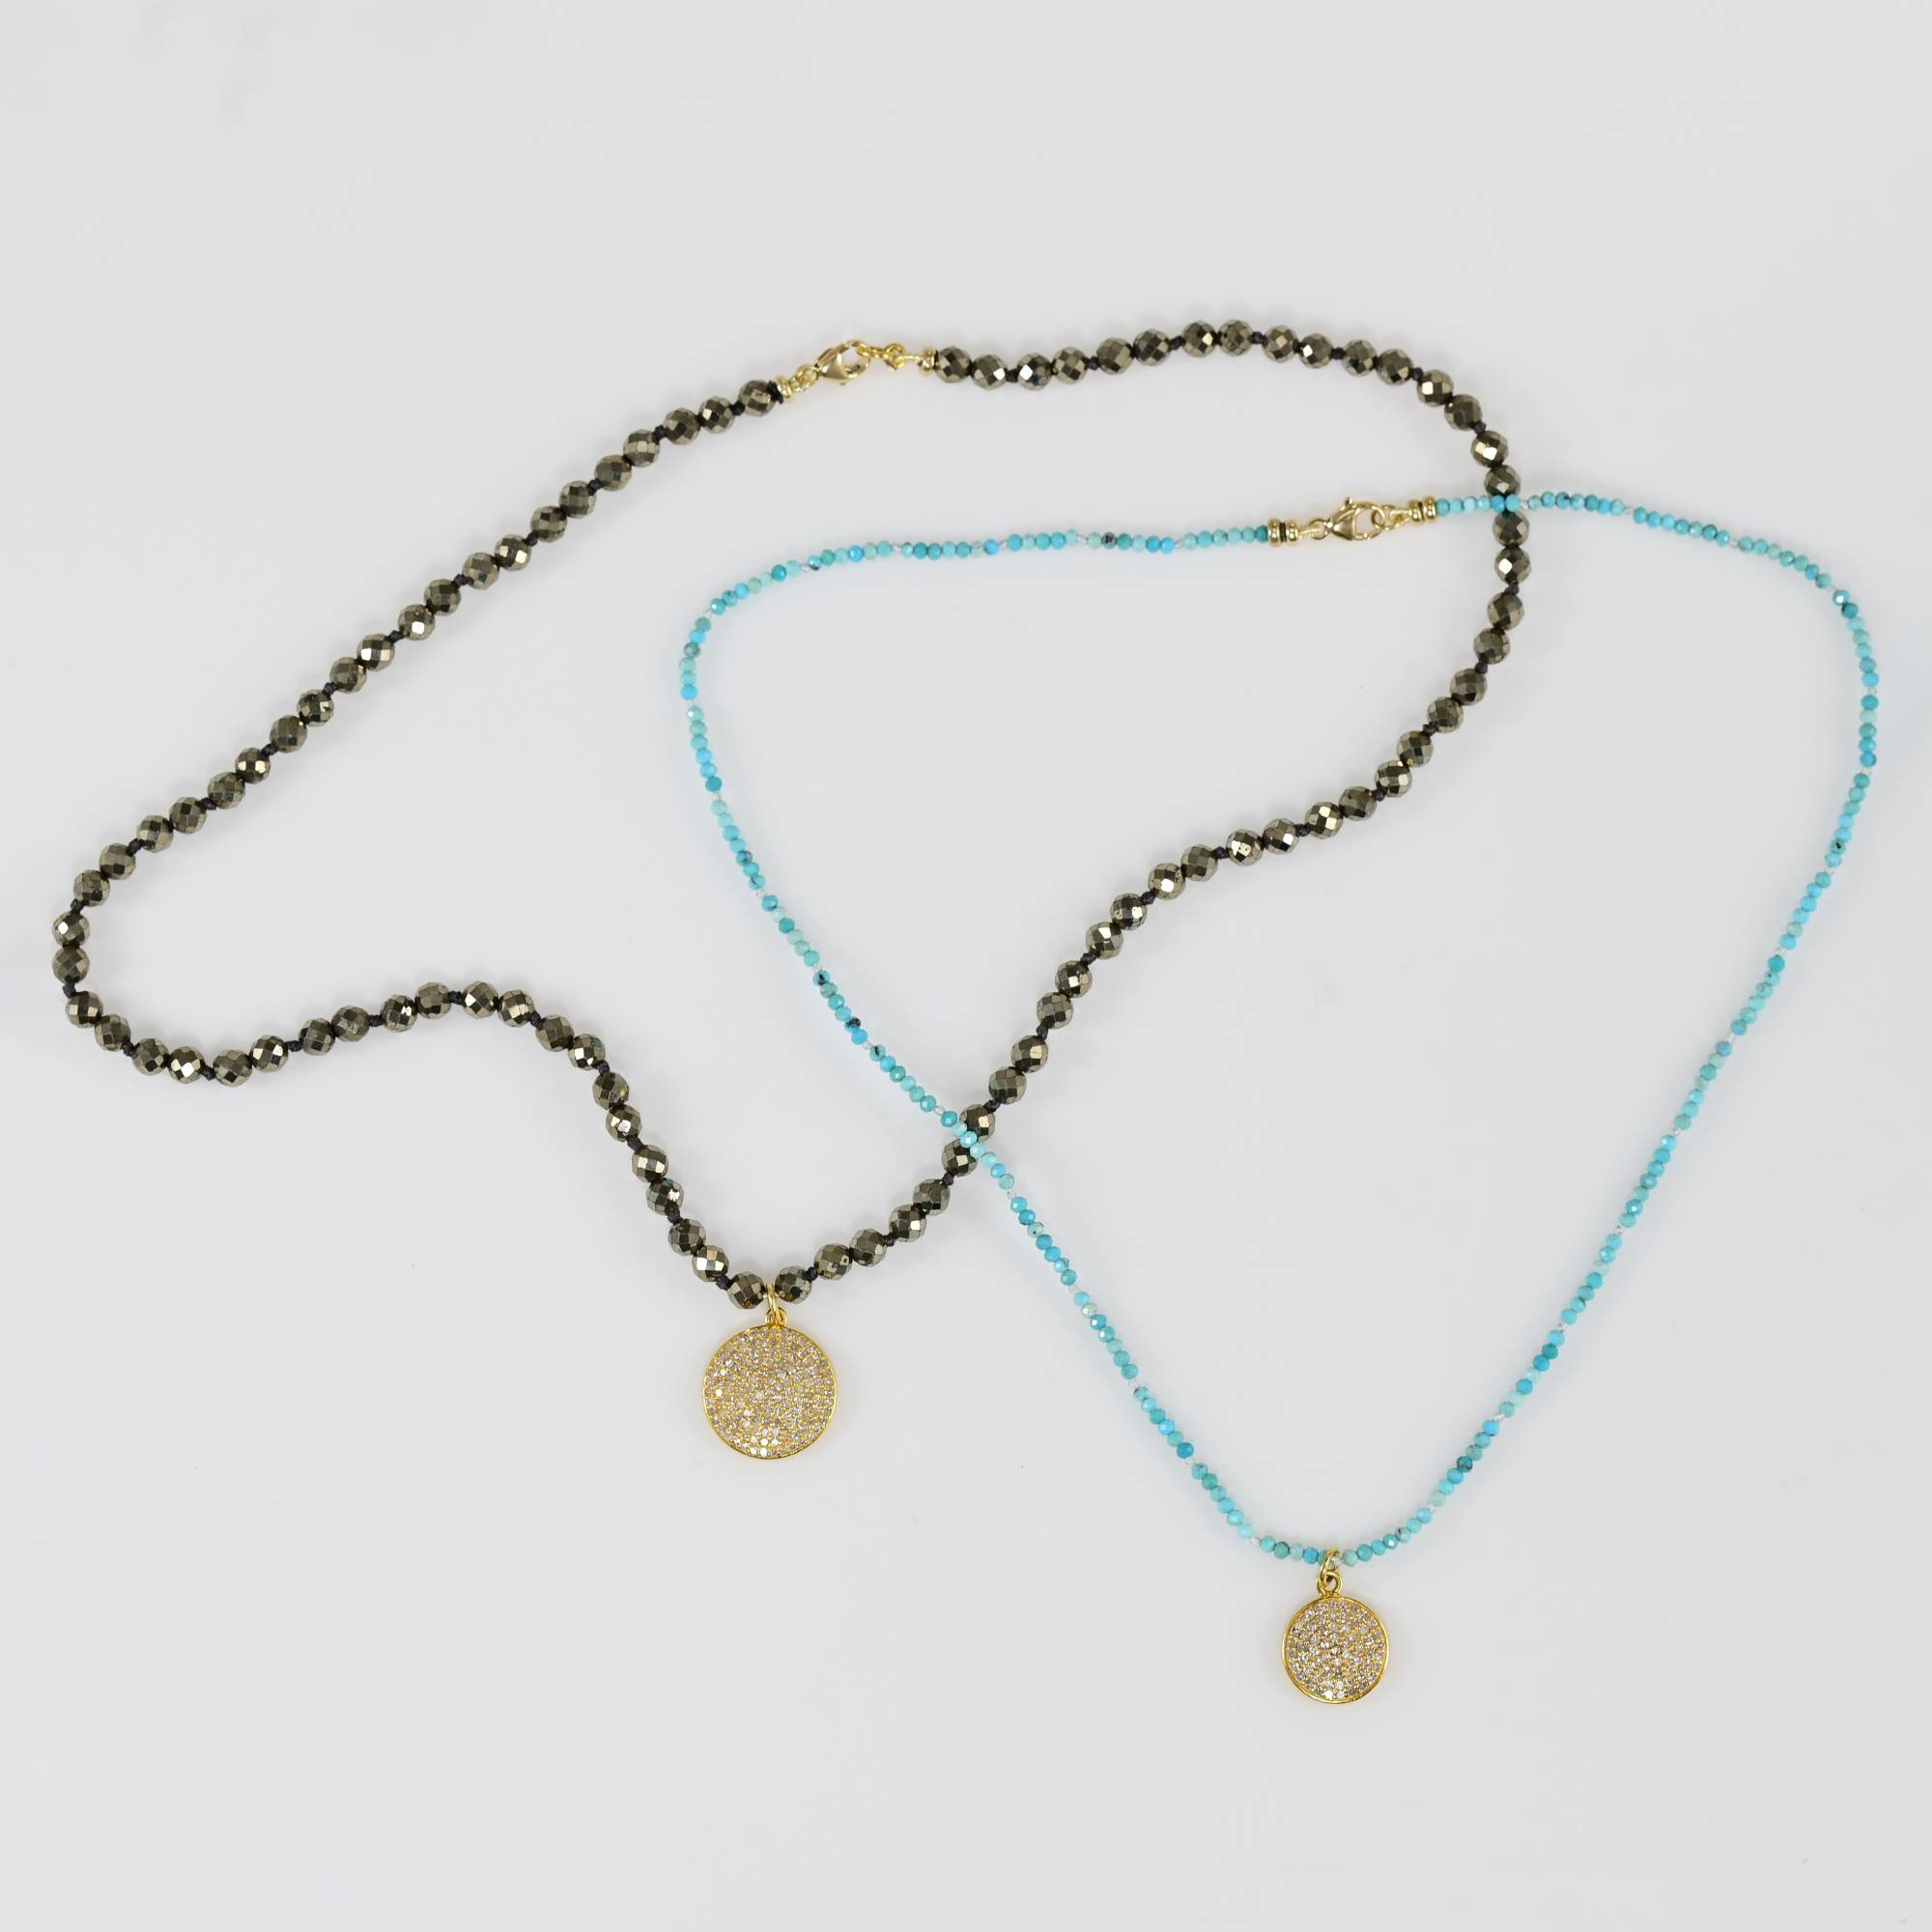 Delicate necklaces, Pyrite, Turquoise, Diamonds and gold